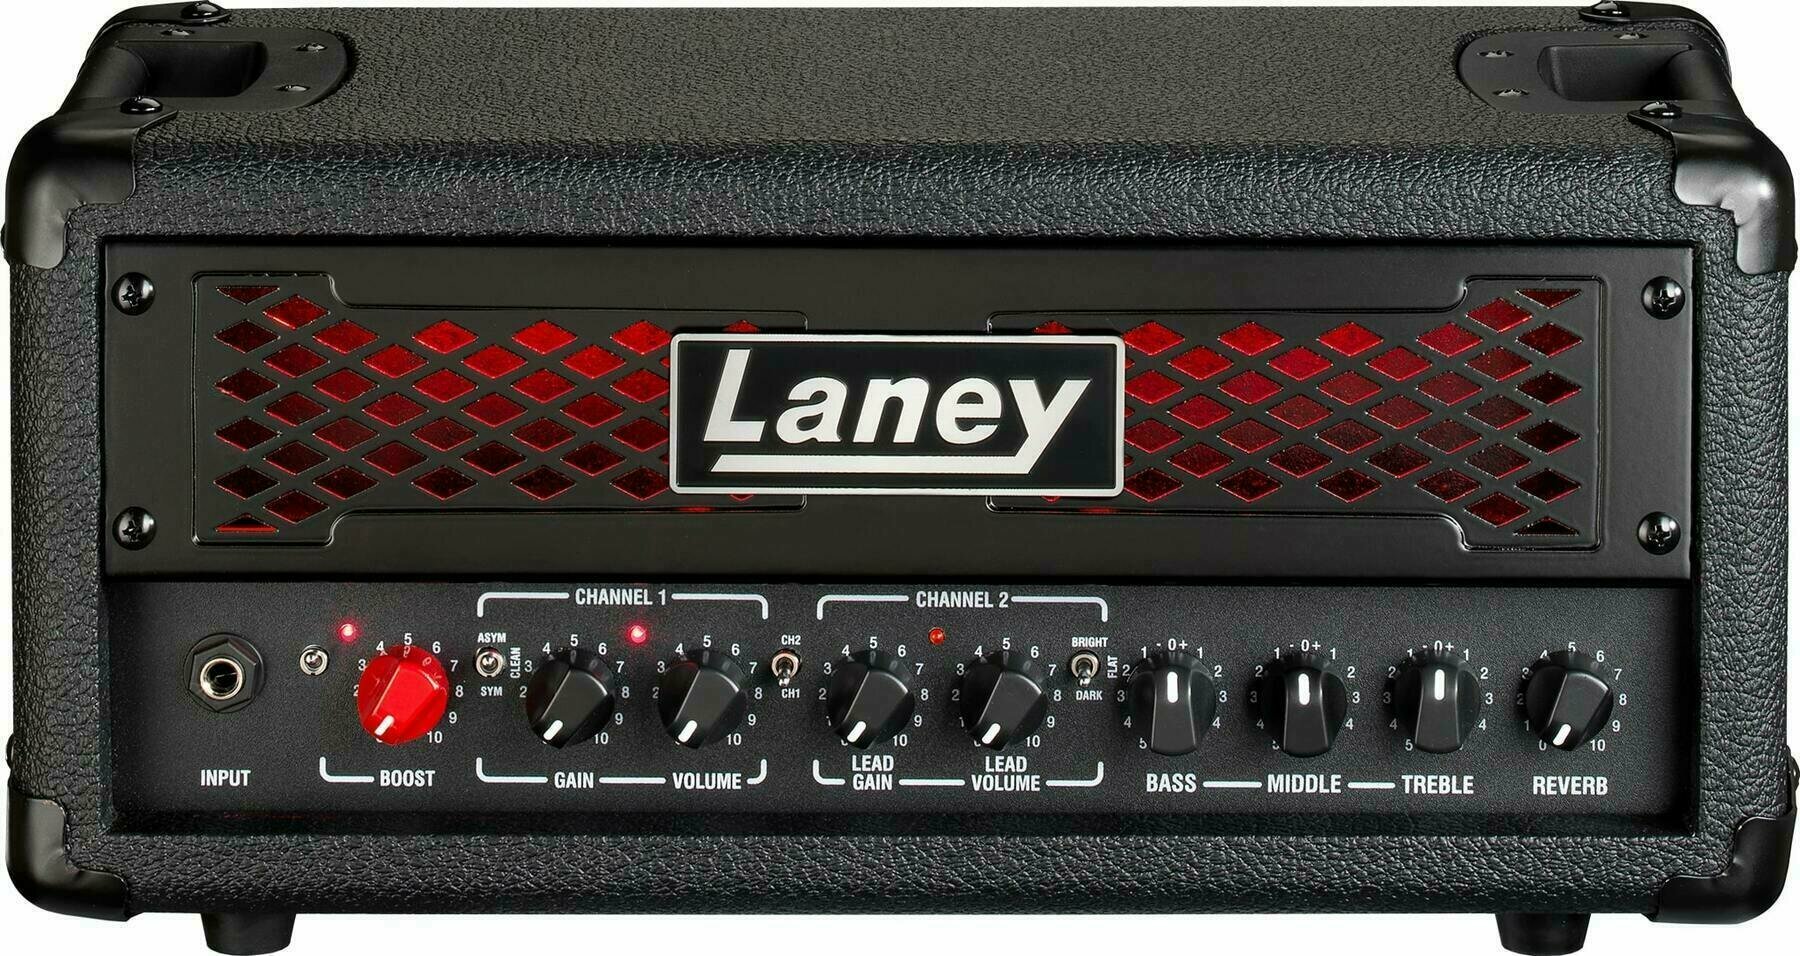 Solid-State Amplifier Laney IRF-DUALTOP (Just unboxed)